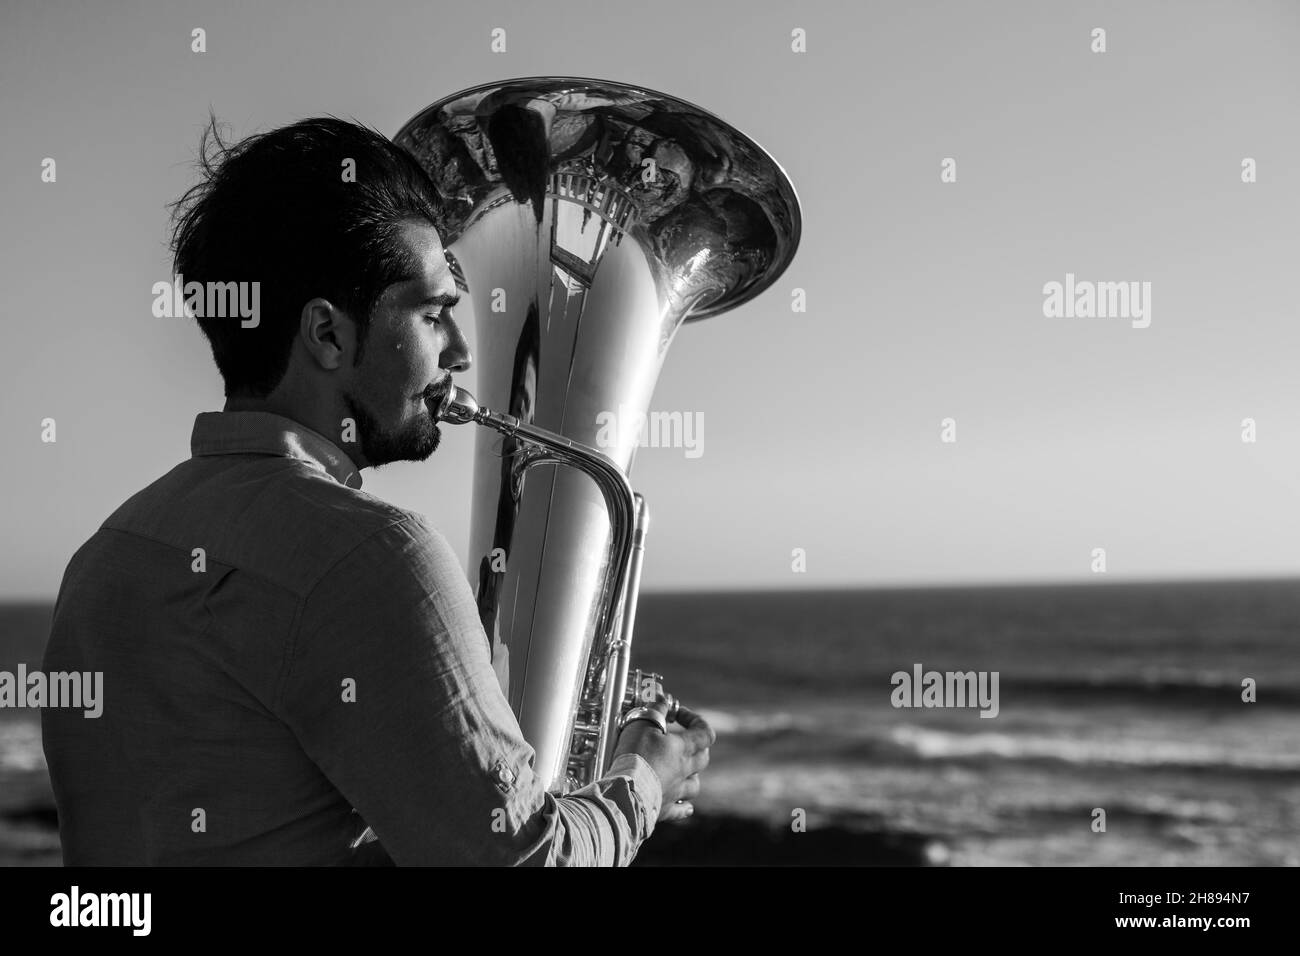 A musician plays a trumpet near the ocean. Black and white photo. Stock Photo